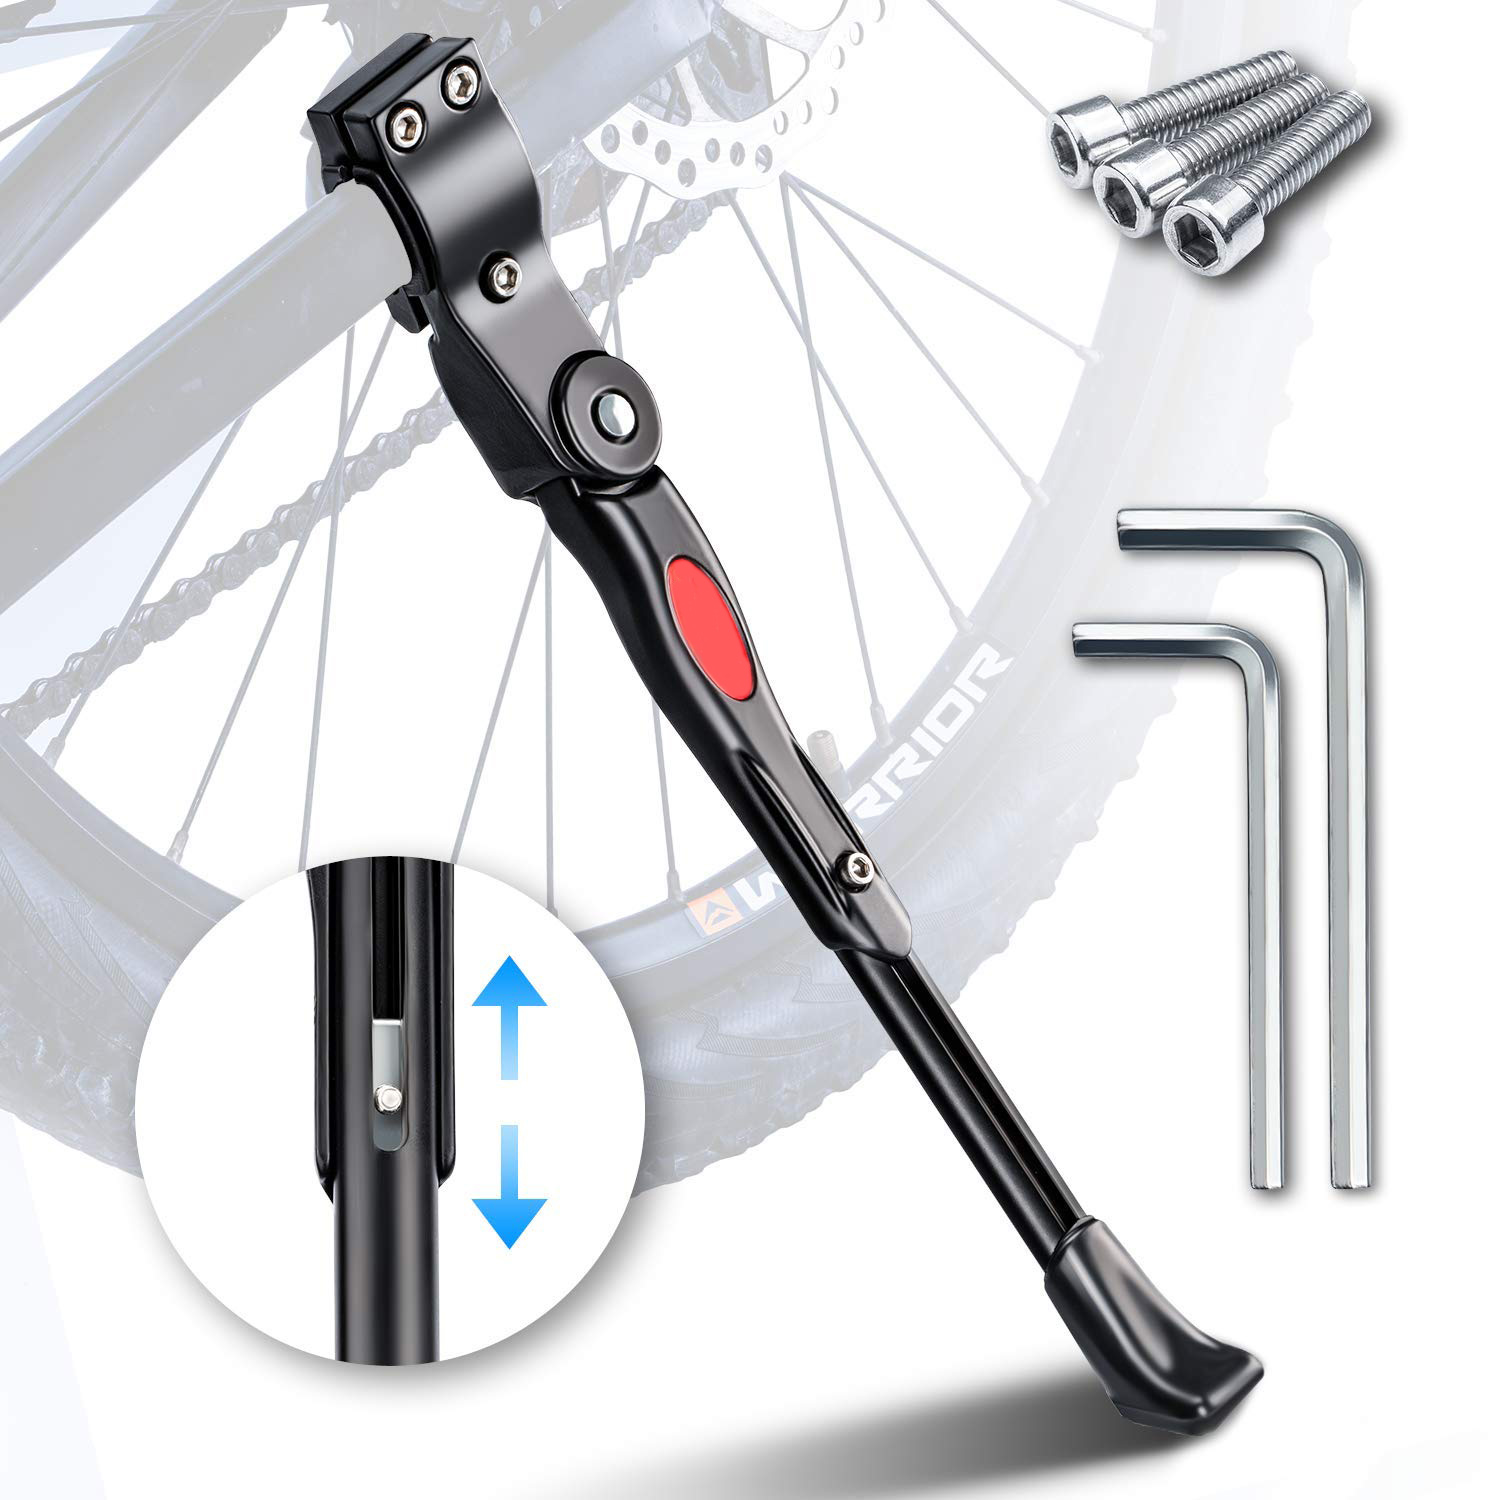 Adjustable Aluminum Alloy Bicycle Parking Side Kick Stand Rear Leg Brace Support Quick Release with Anti-Skid Foot for 26//27.5 Bike Kickstand 29in Mountain Road Bikes